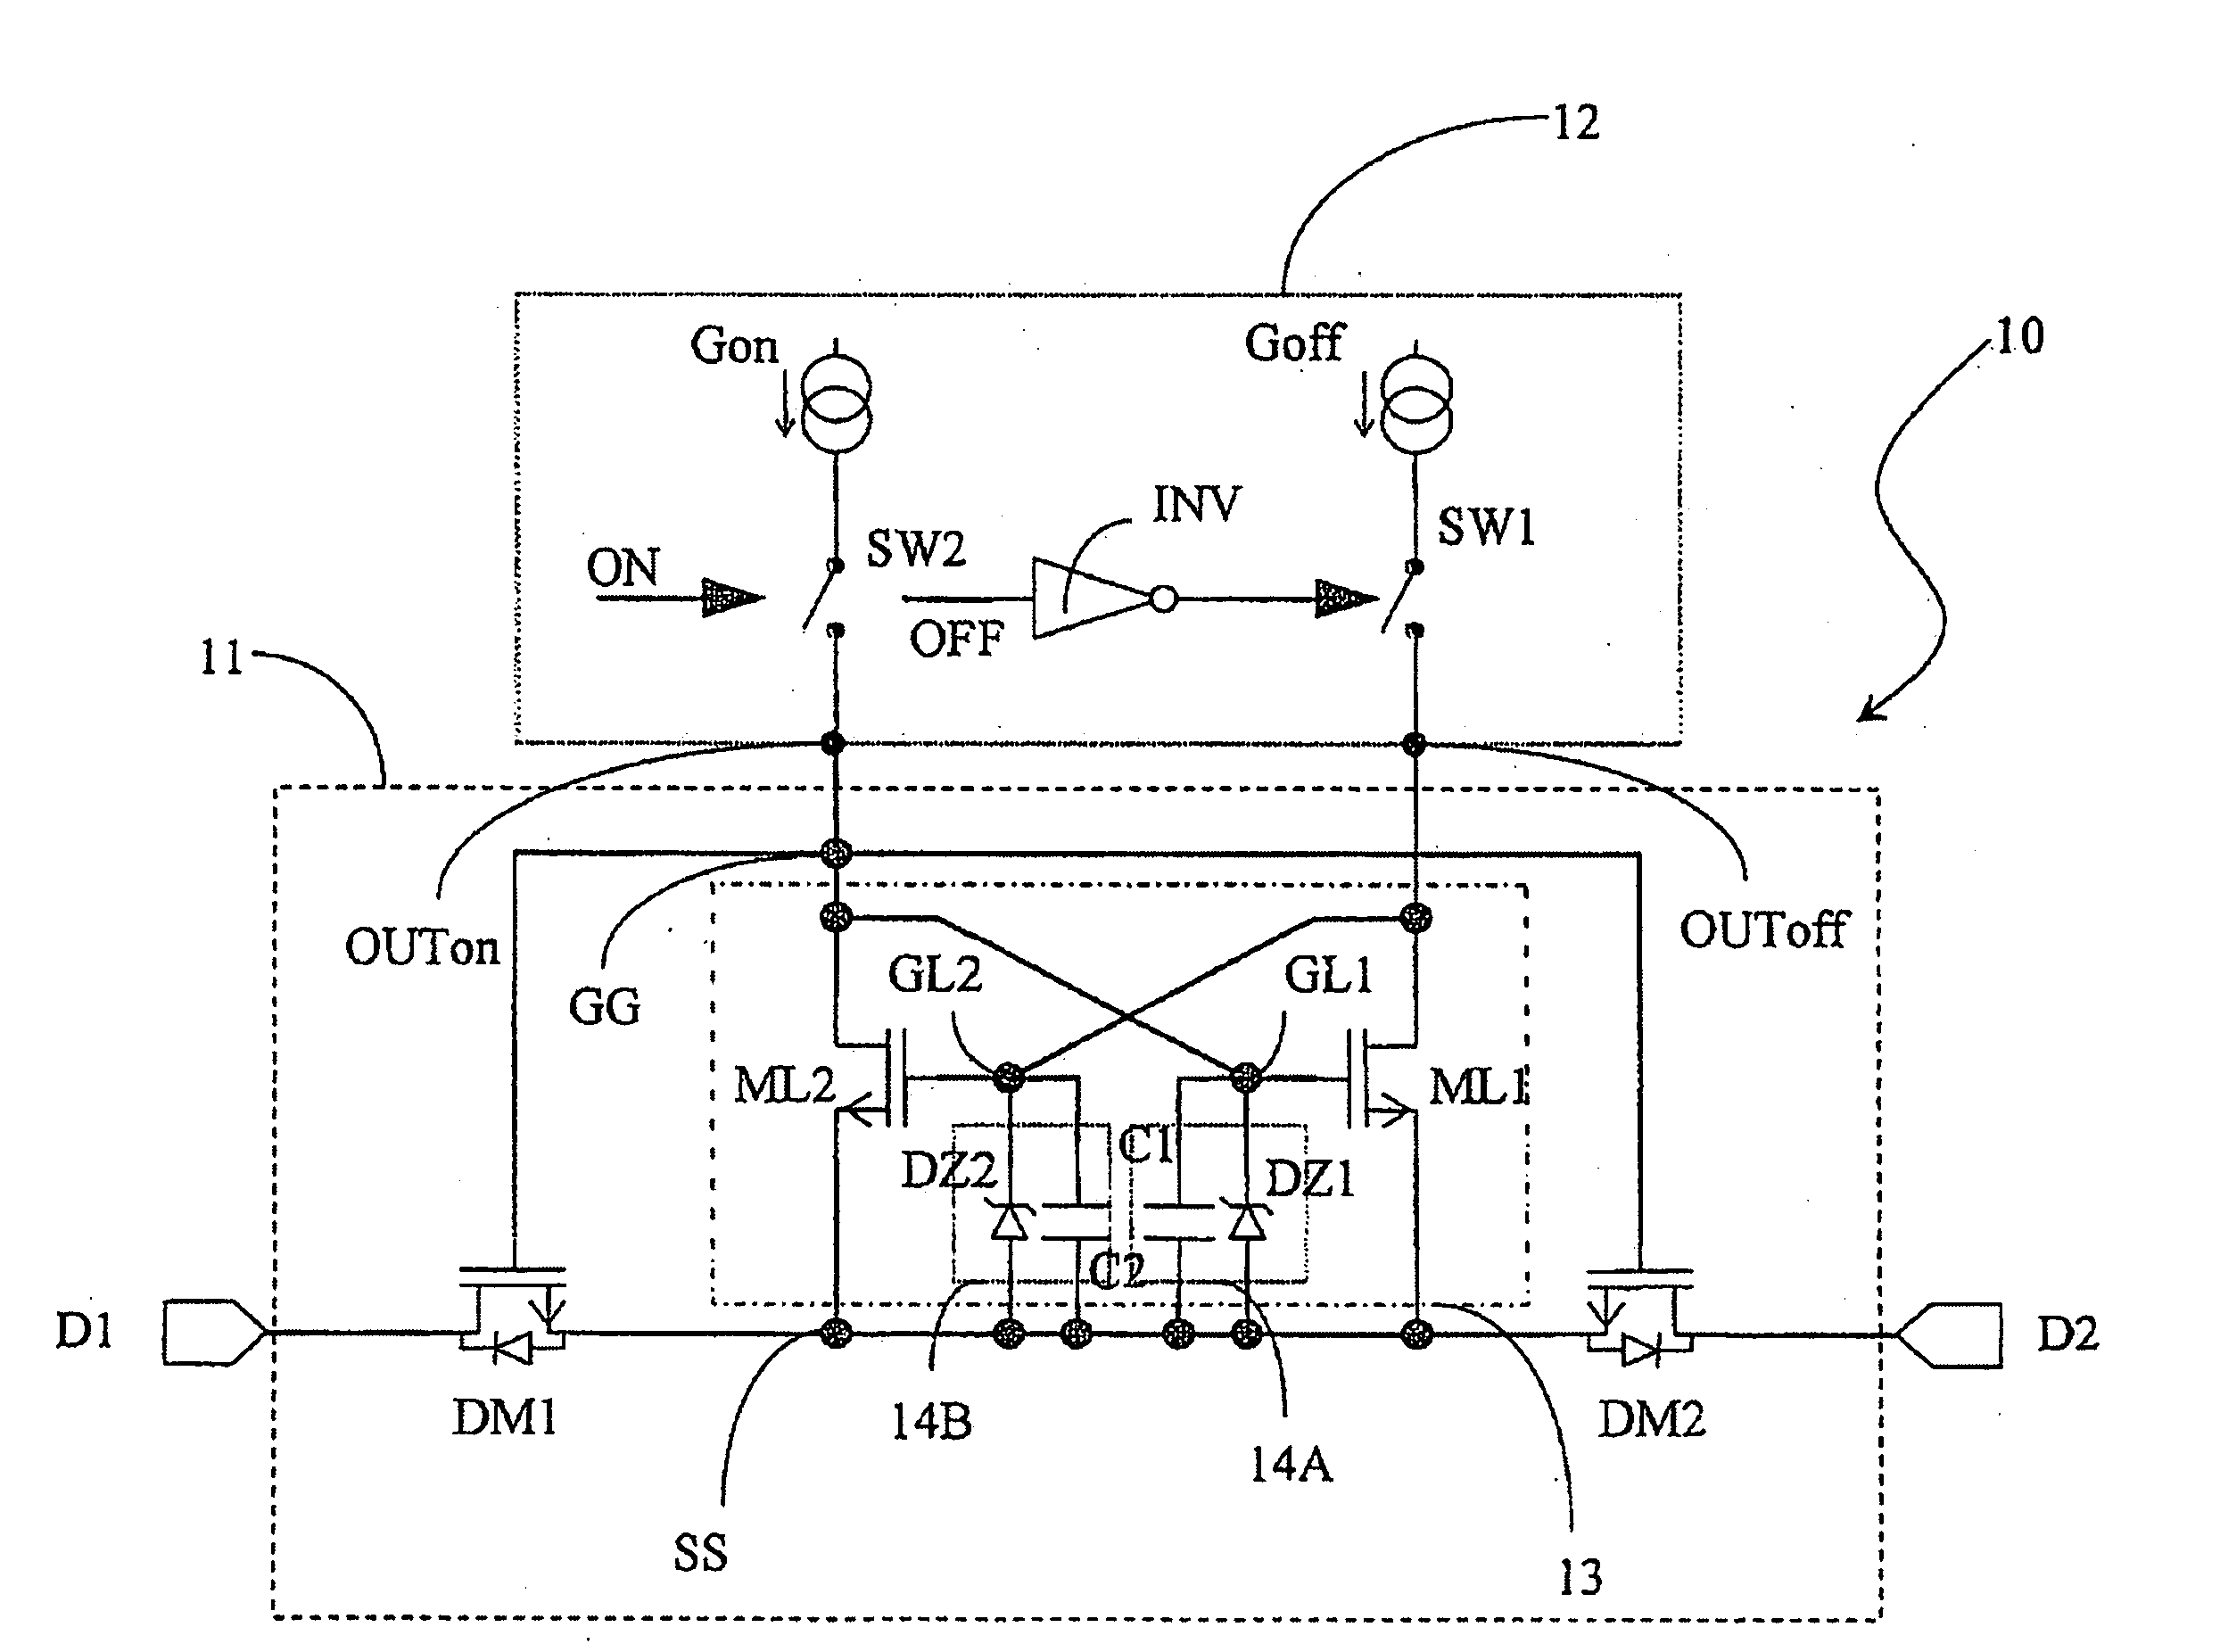 Driving configuration of a switch